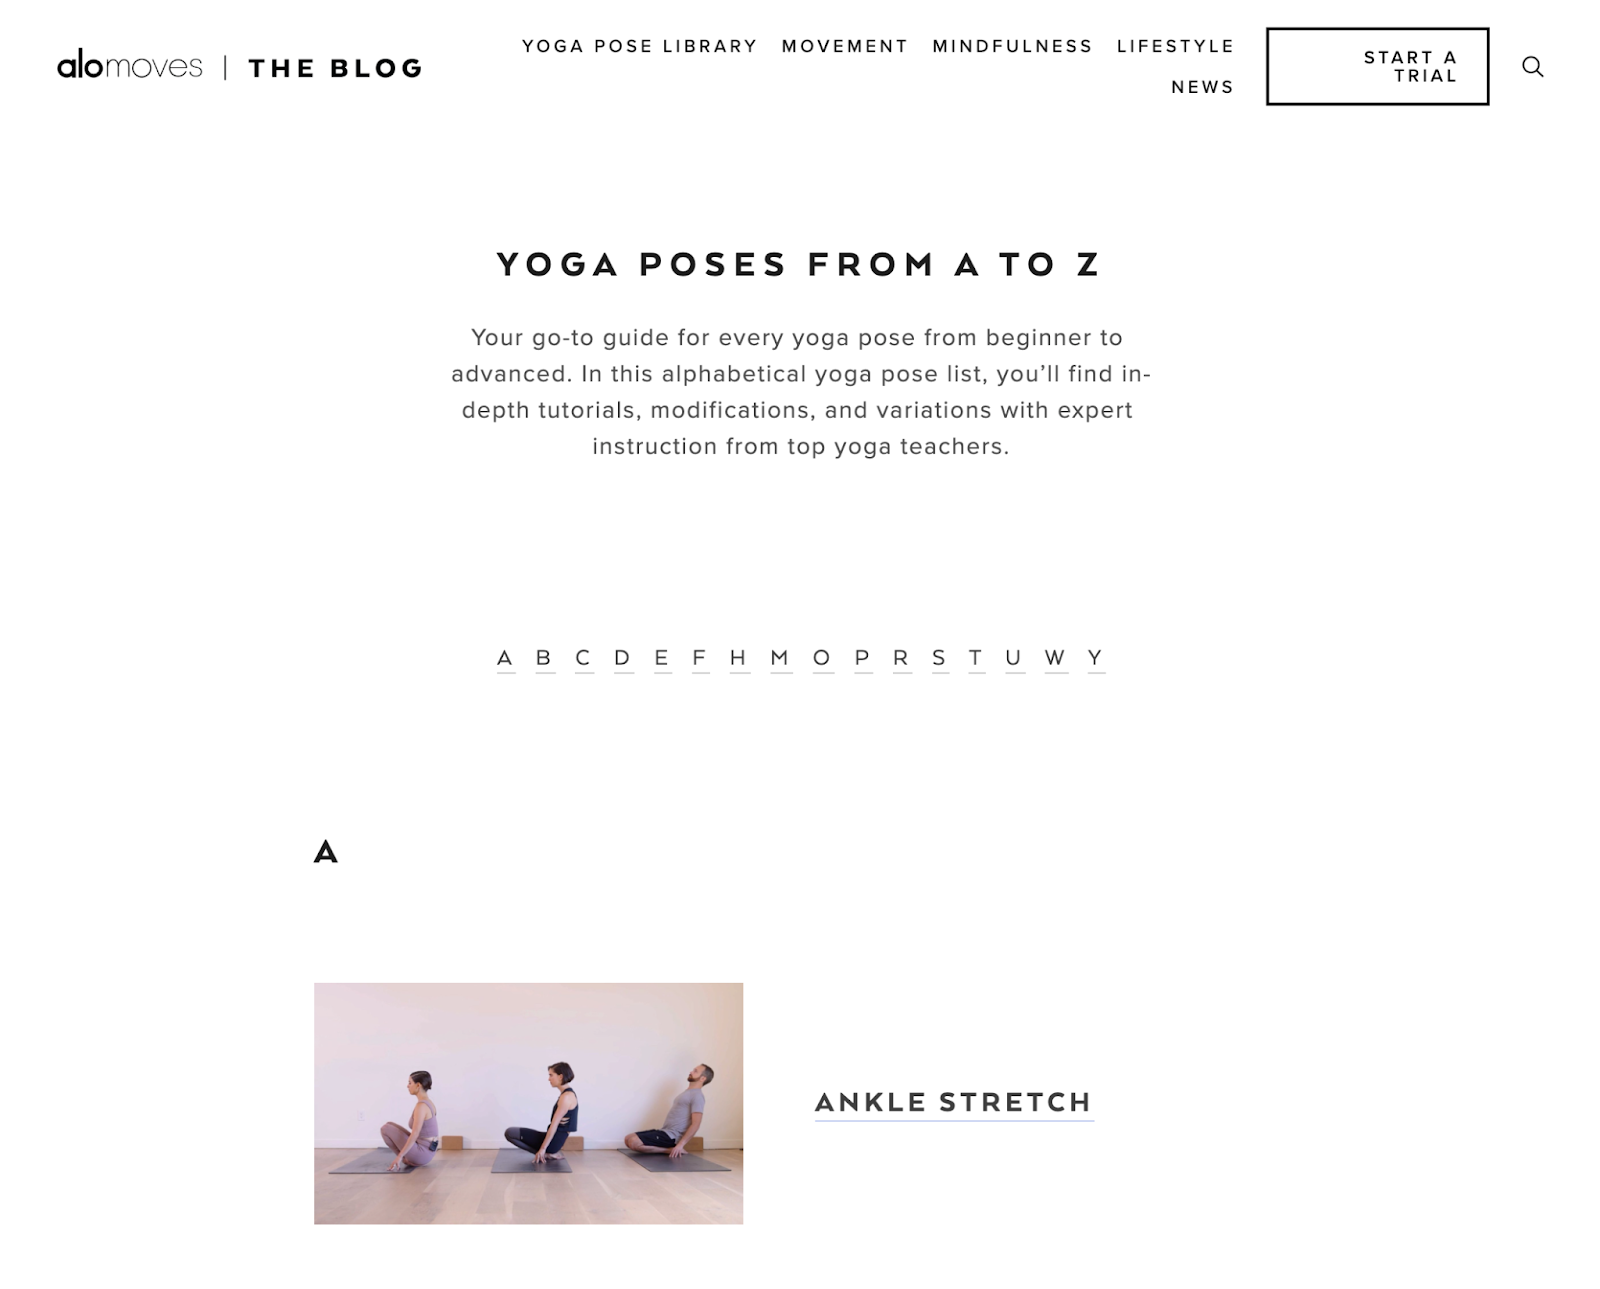 Alo’s Alo Moves yoga pose blog, showing three people demonstrating an ankle stretch.